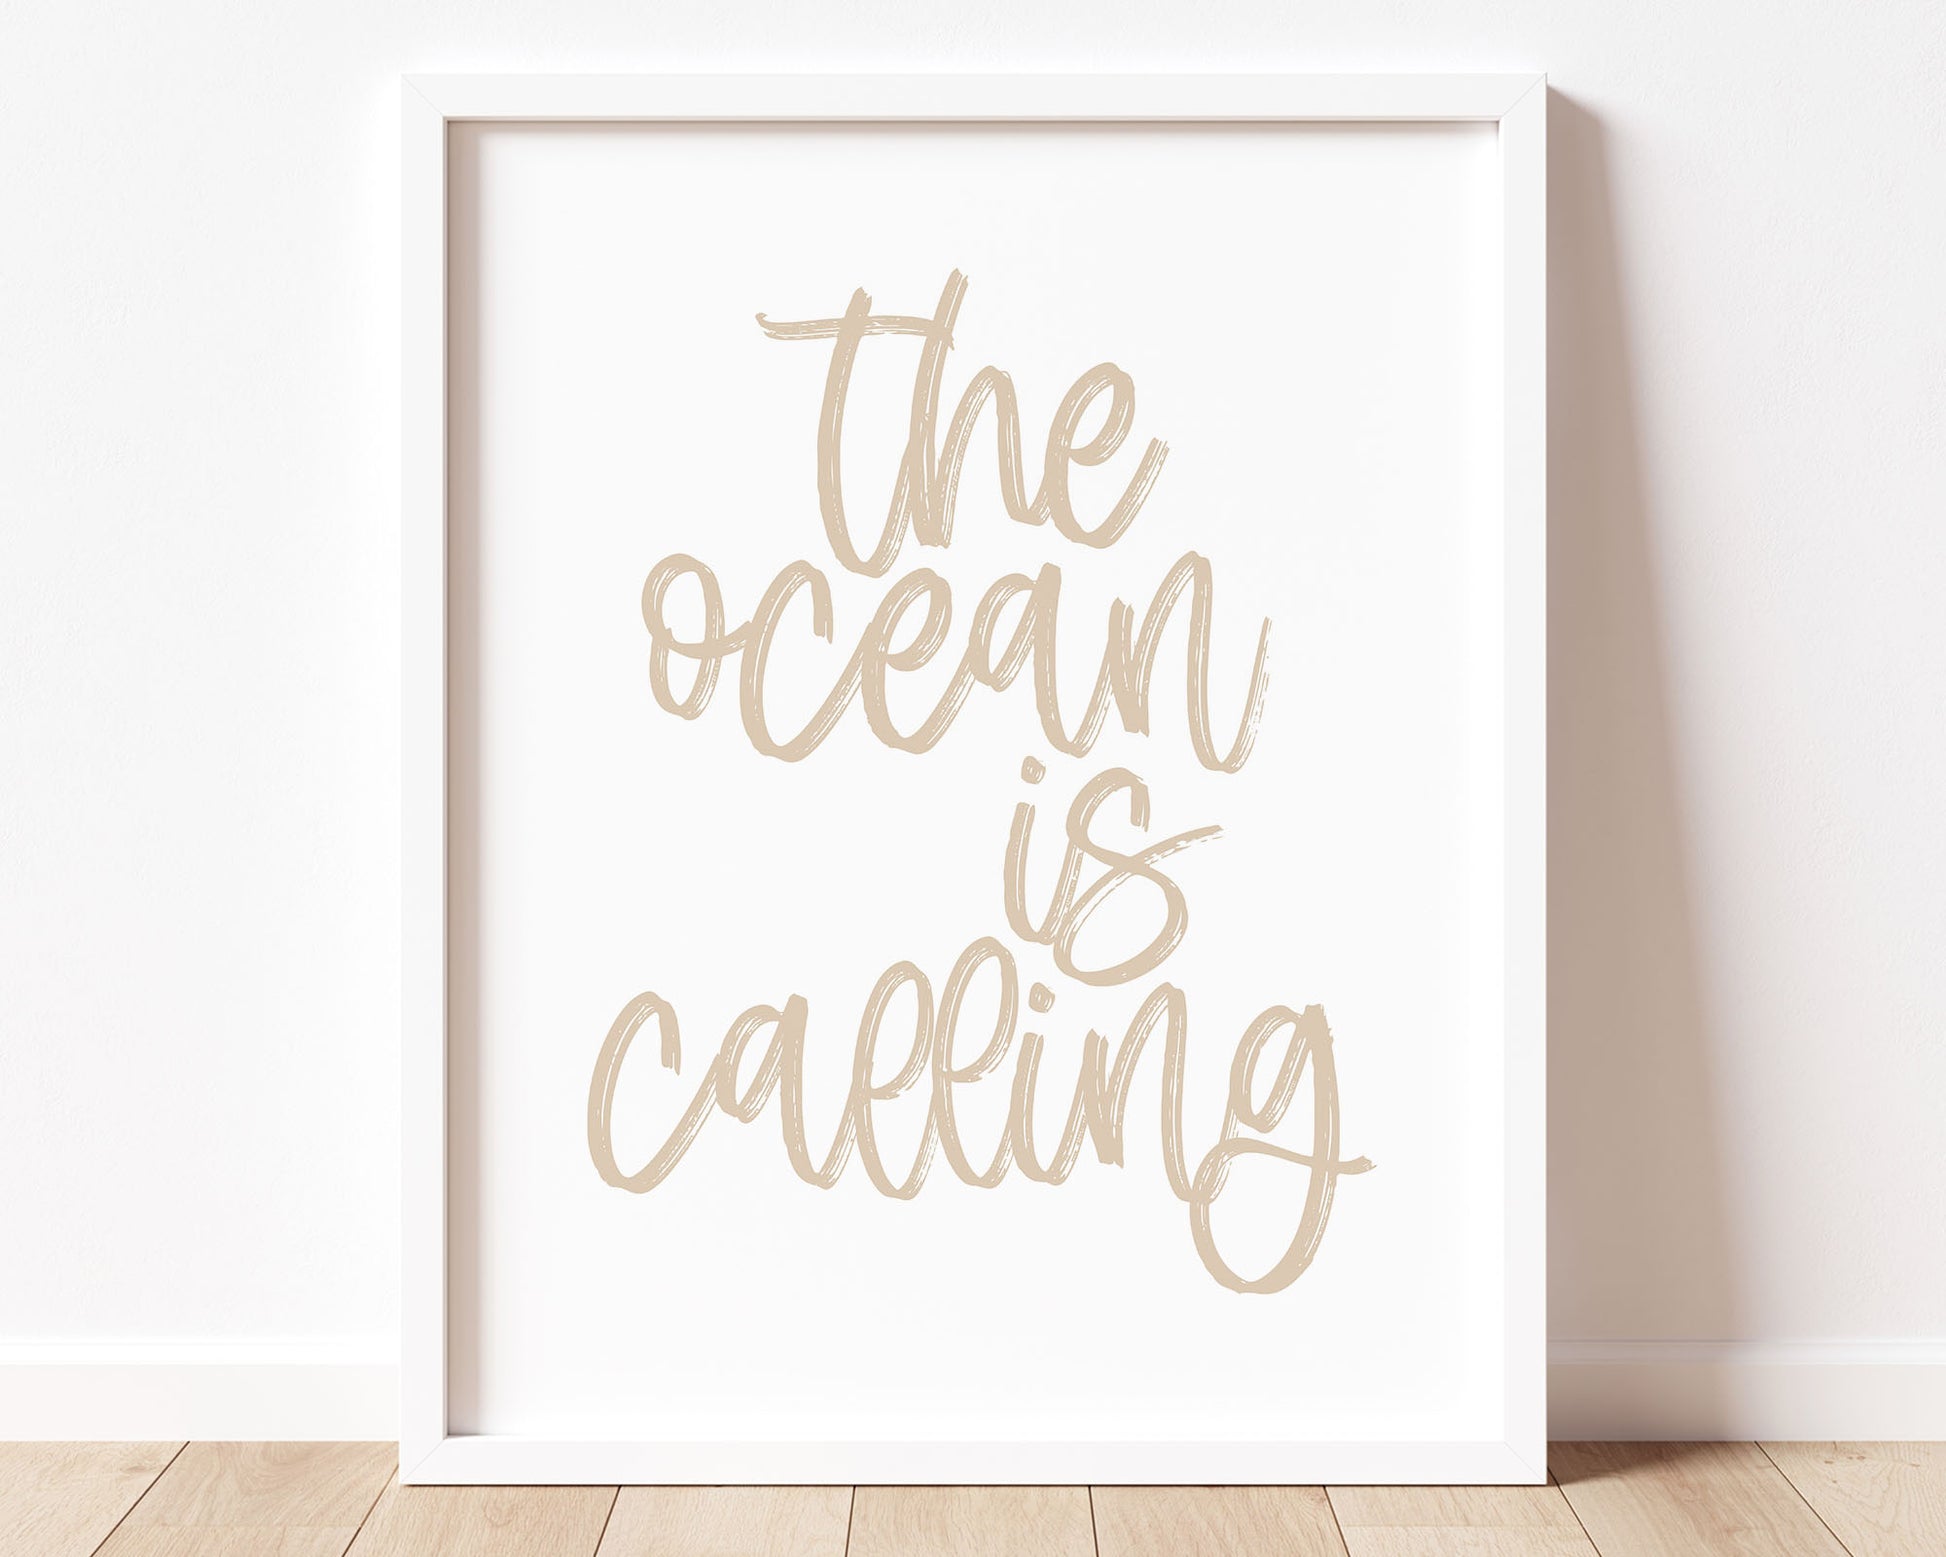 Neutral Tan colored The Ocean Is Calling Printable Wall Art featuring a textured brush style cursive lettered quote.